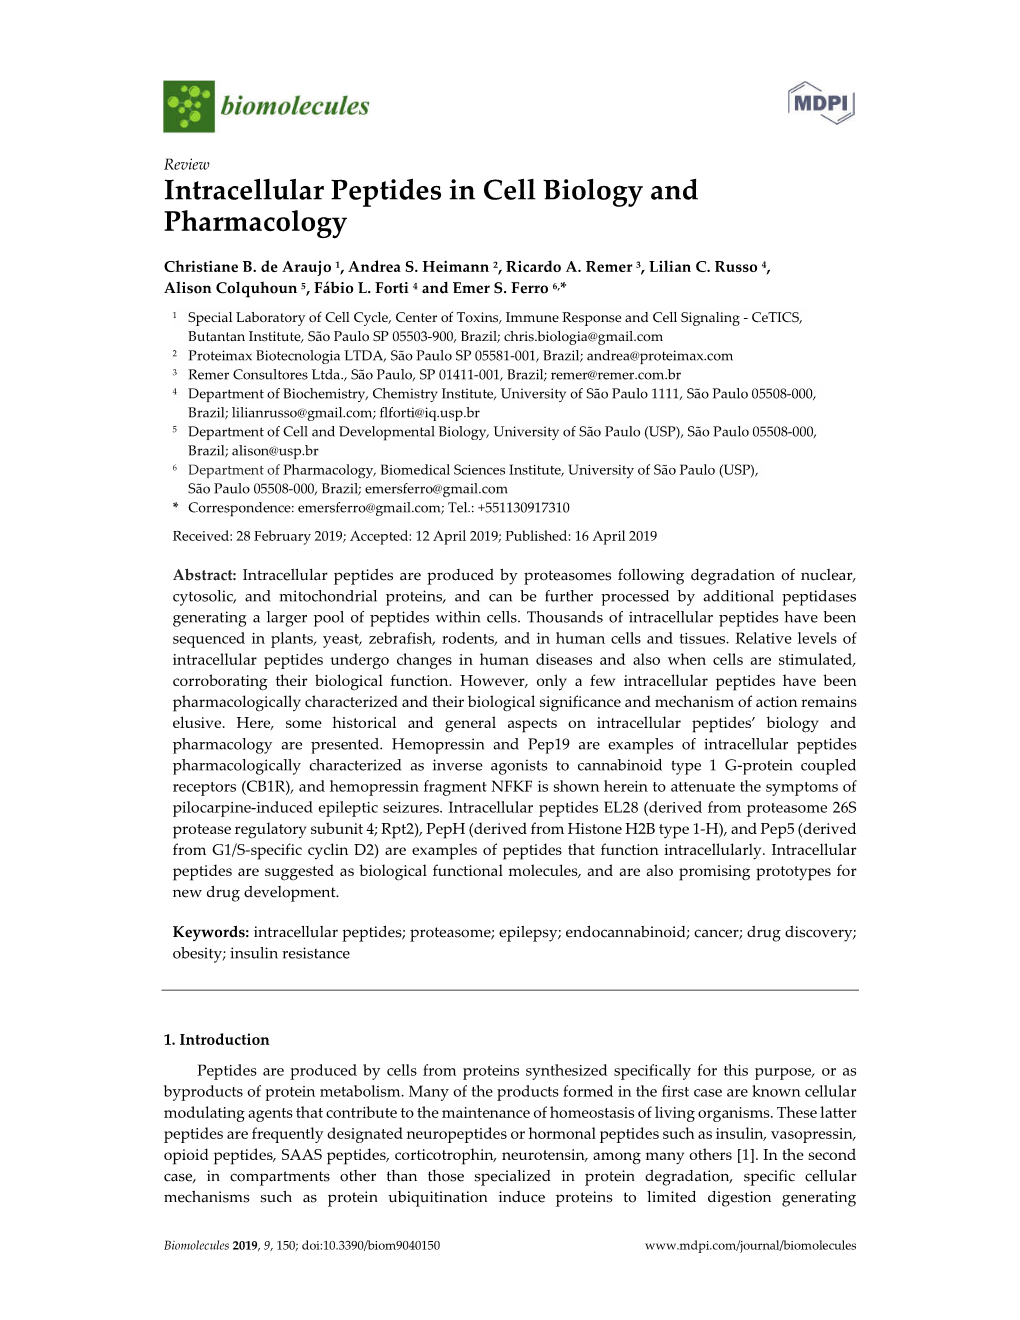 Intracellular Peptides in Cell Biology and Pharmacology